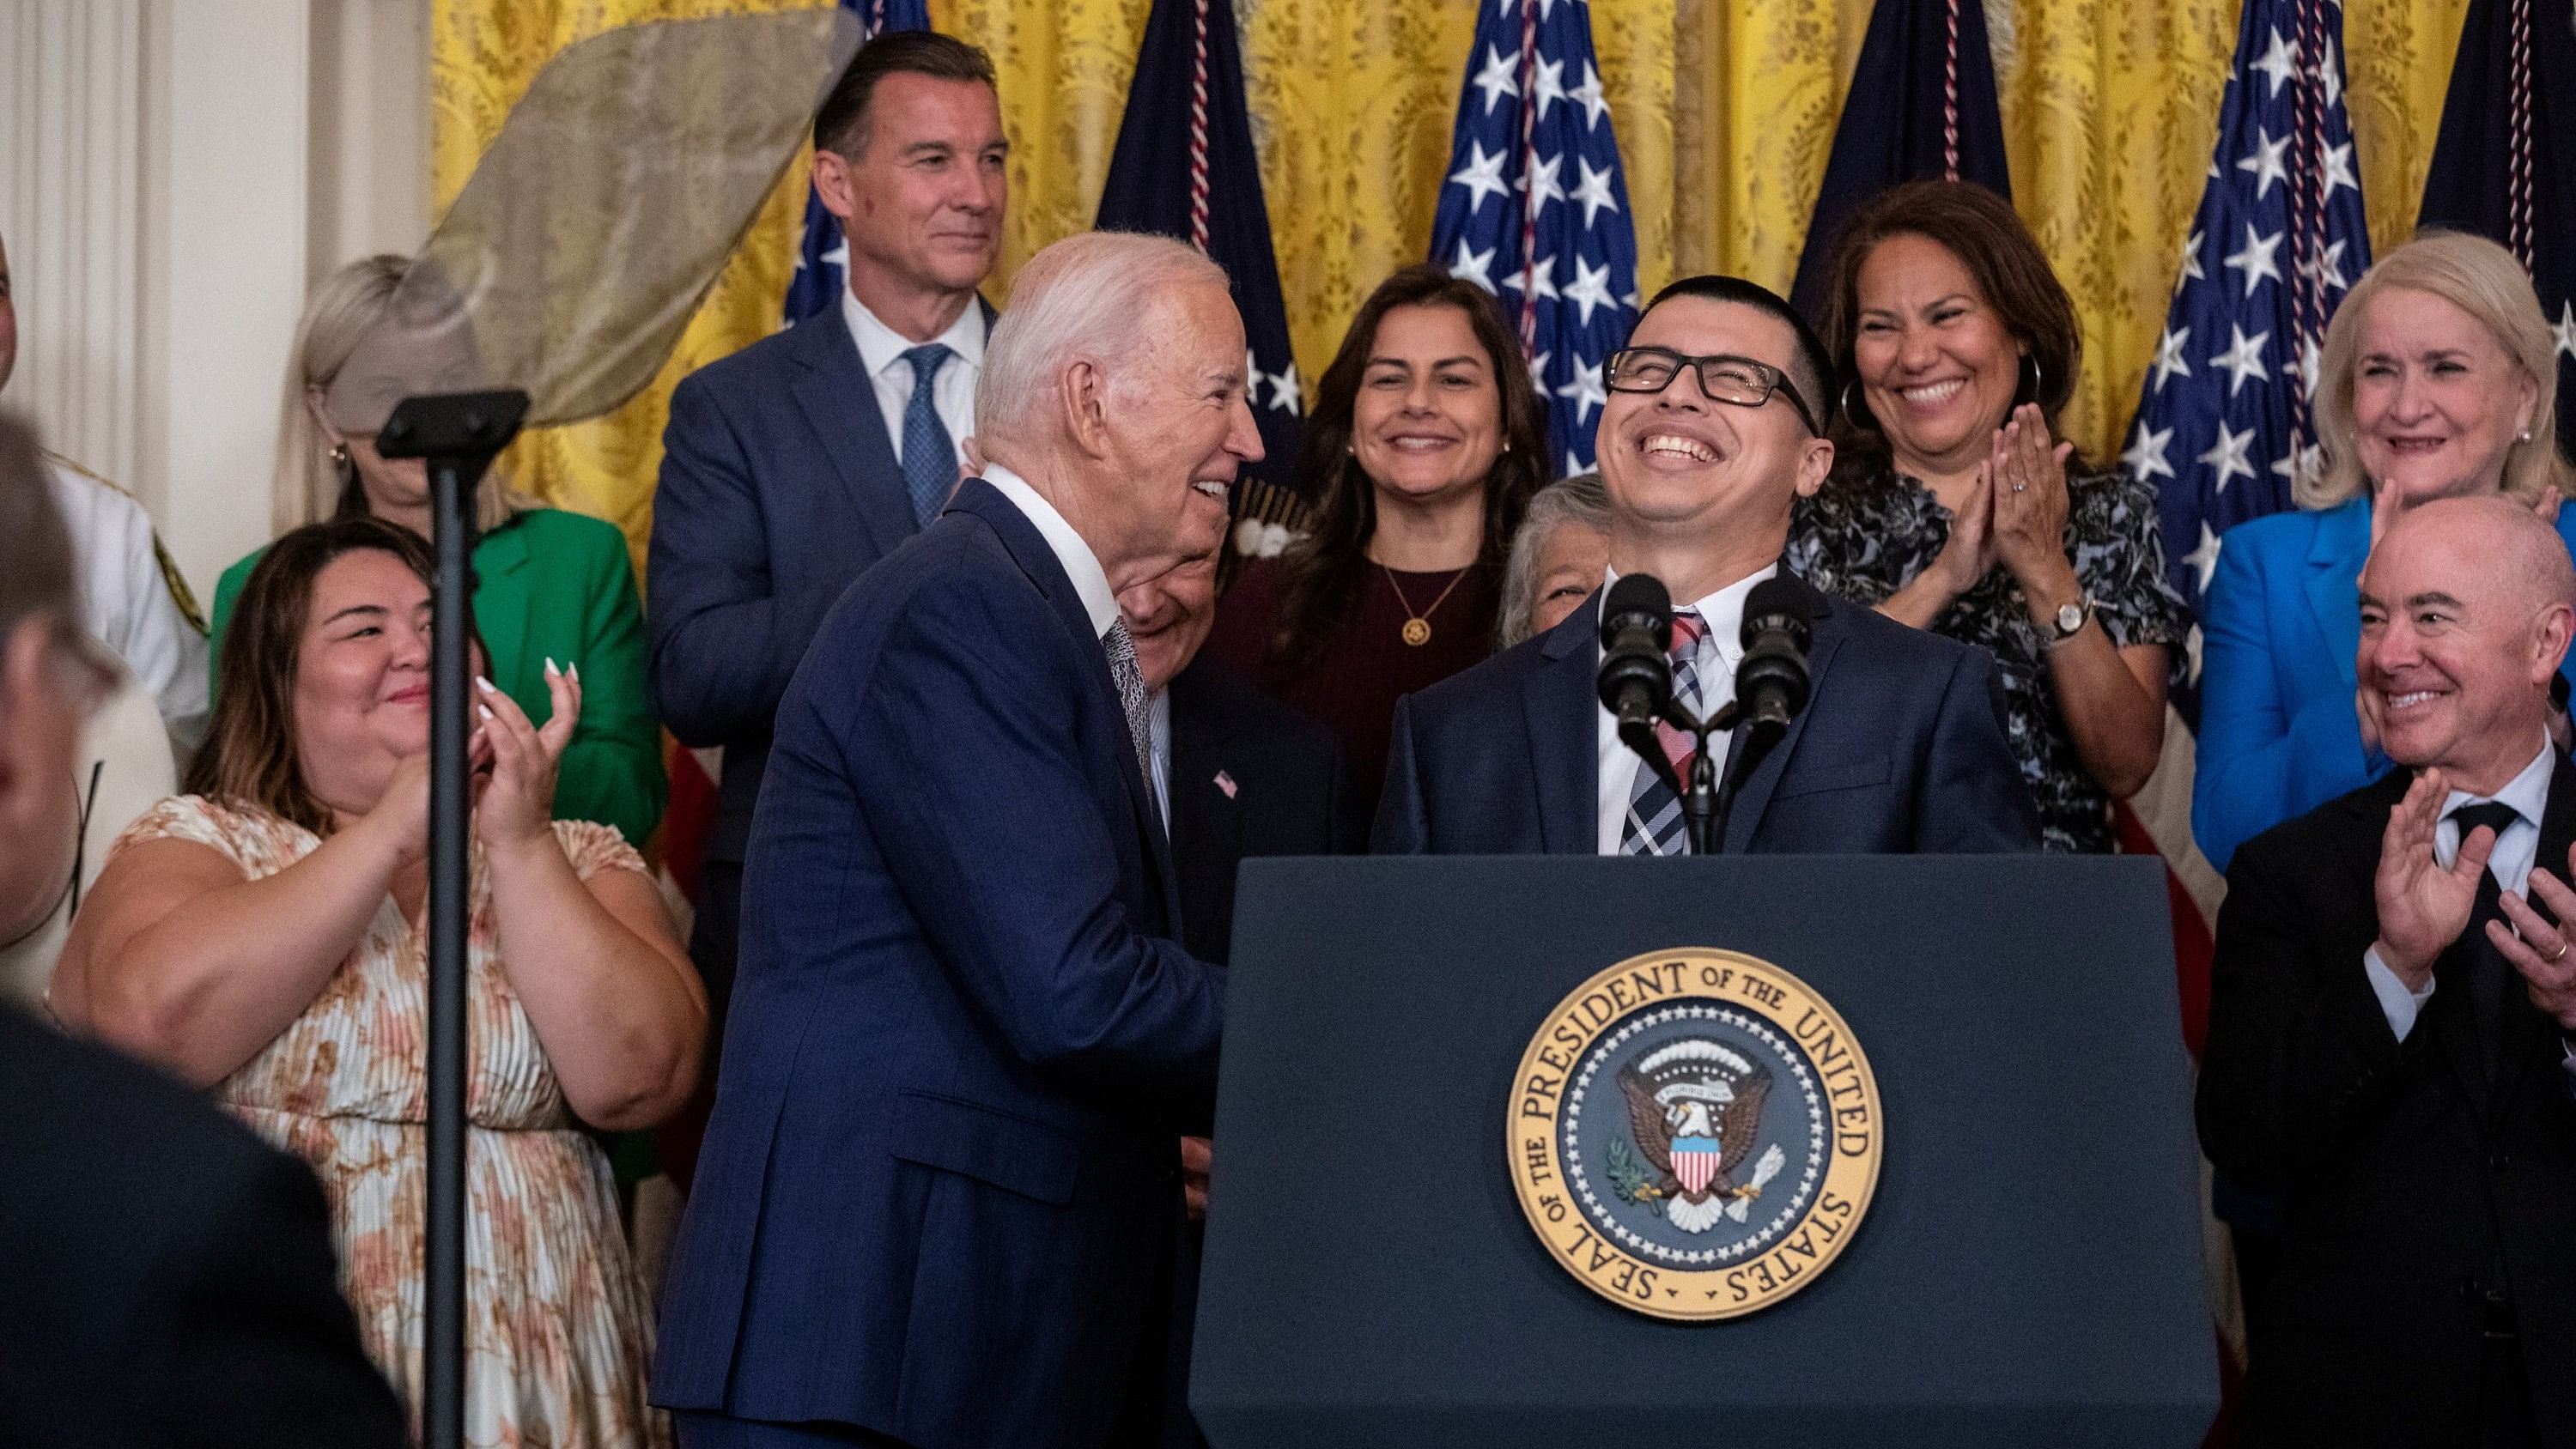 <div class="paragraphs"><p>DACA recipient Javier Quiroz Castro introduces U.S. President Joe Biden, before&nbsp;the announcement an executive action to provide immigration relief for spouses of U.S. citizens, coinciding with the 12th anniversary of the Deferred Action for Childhood Arrivals  program, at the White House in Washington, U.S., June 18, 2024.</p></div>